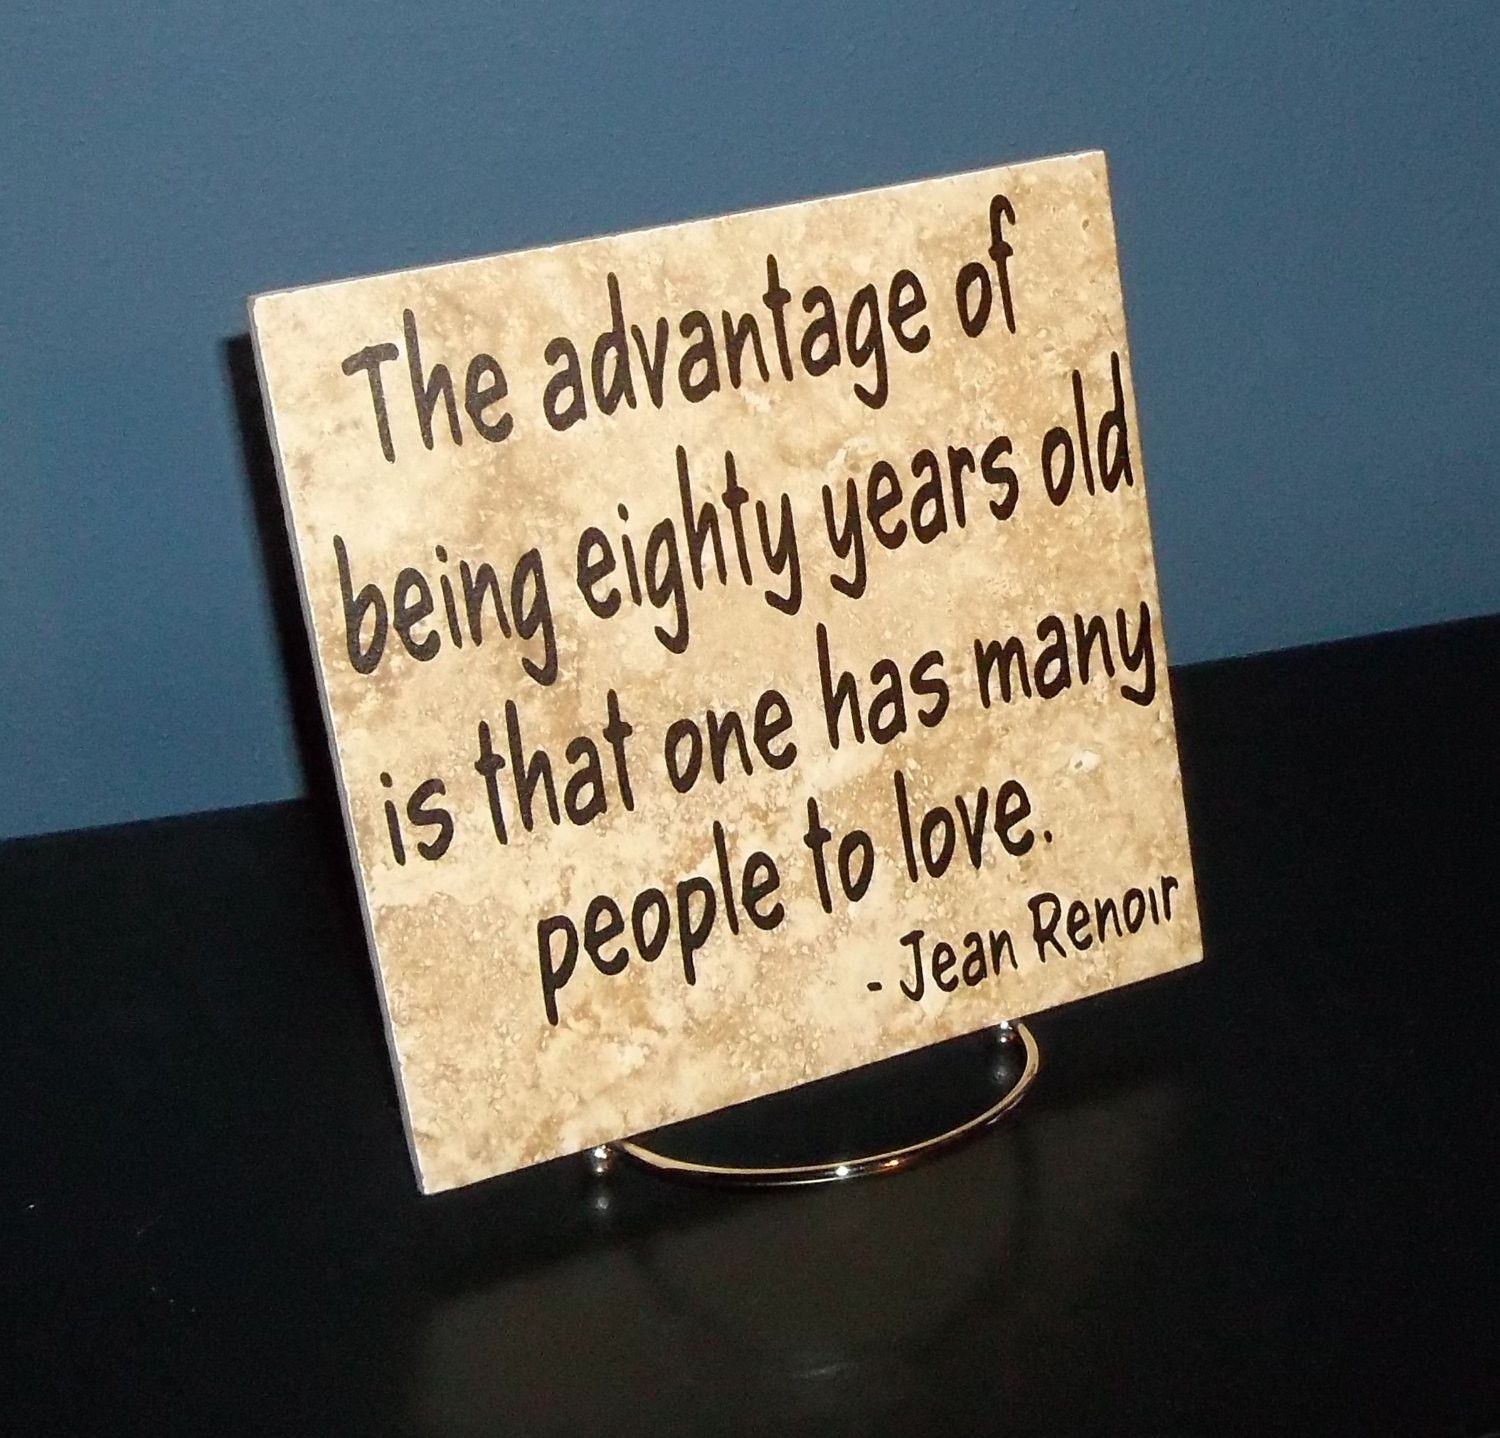 80 Years Old Birthday Quotes
 80th Birthday Decorative Tile